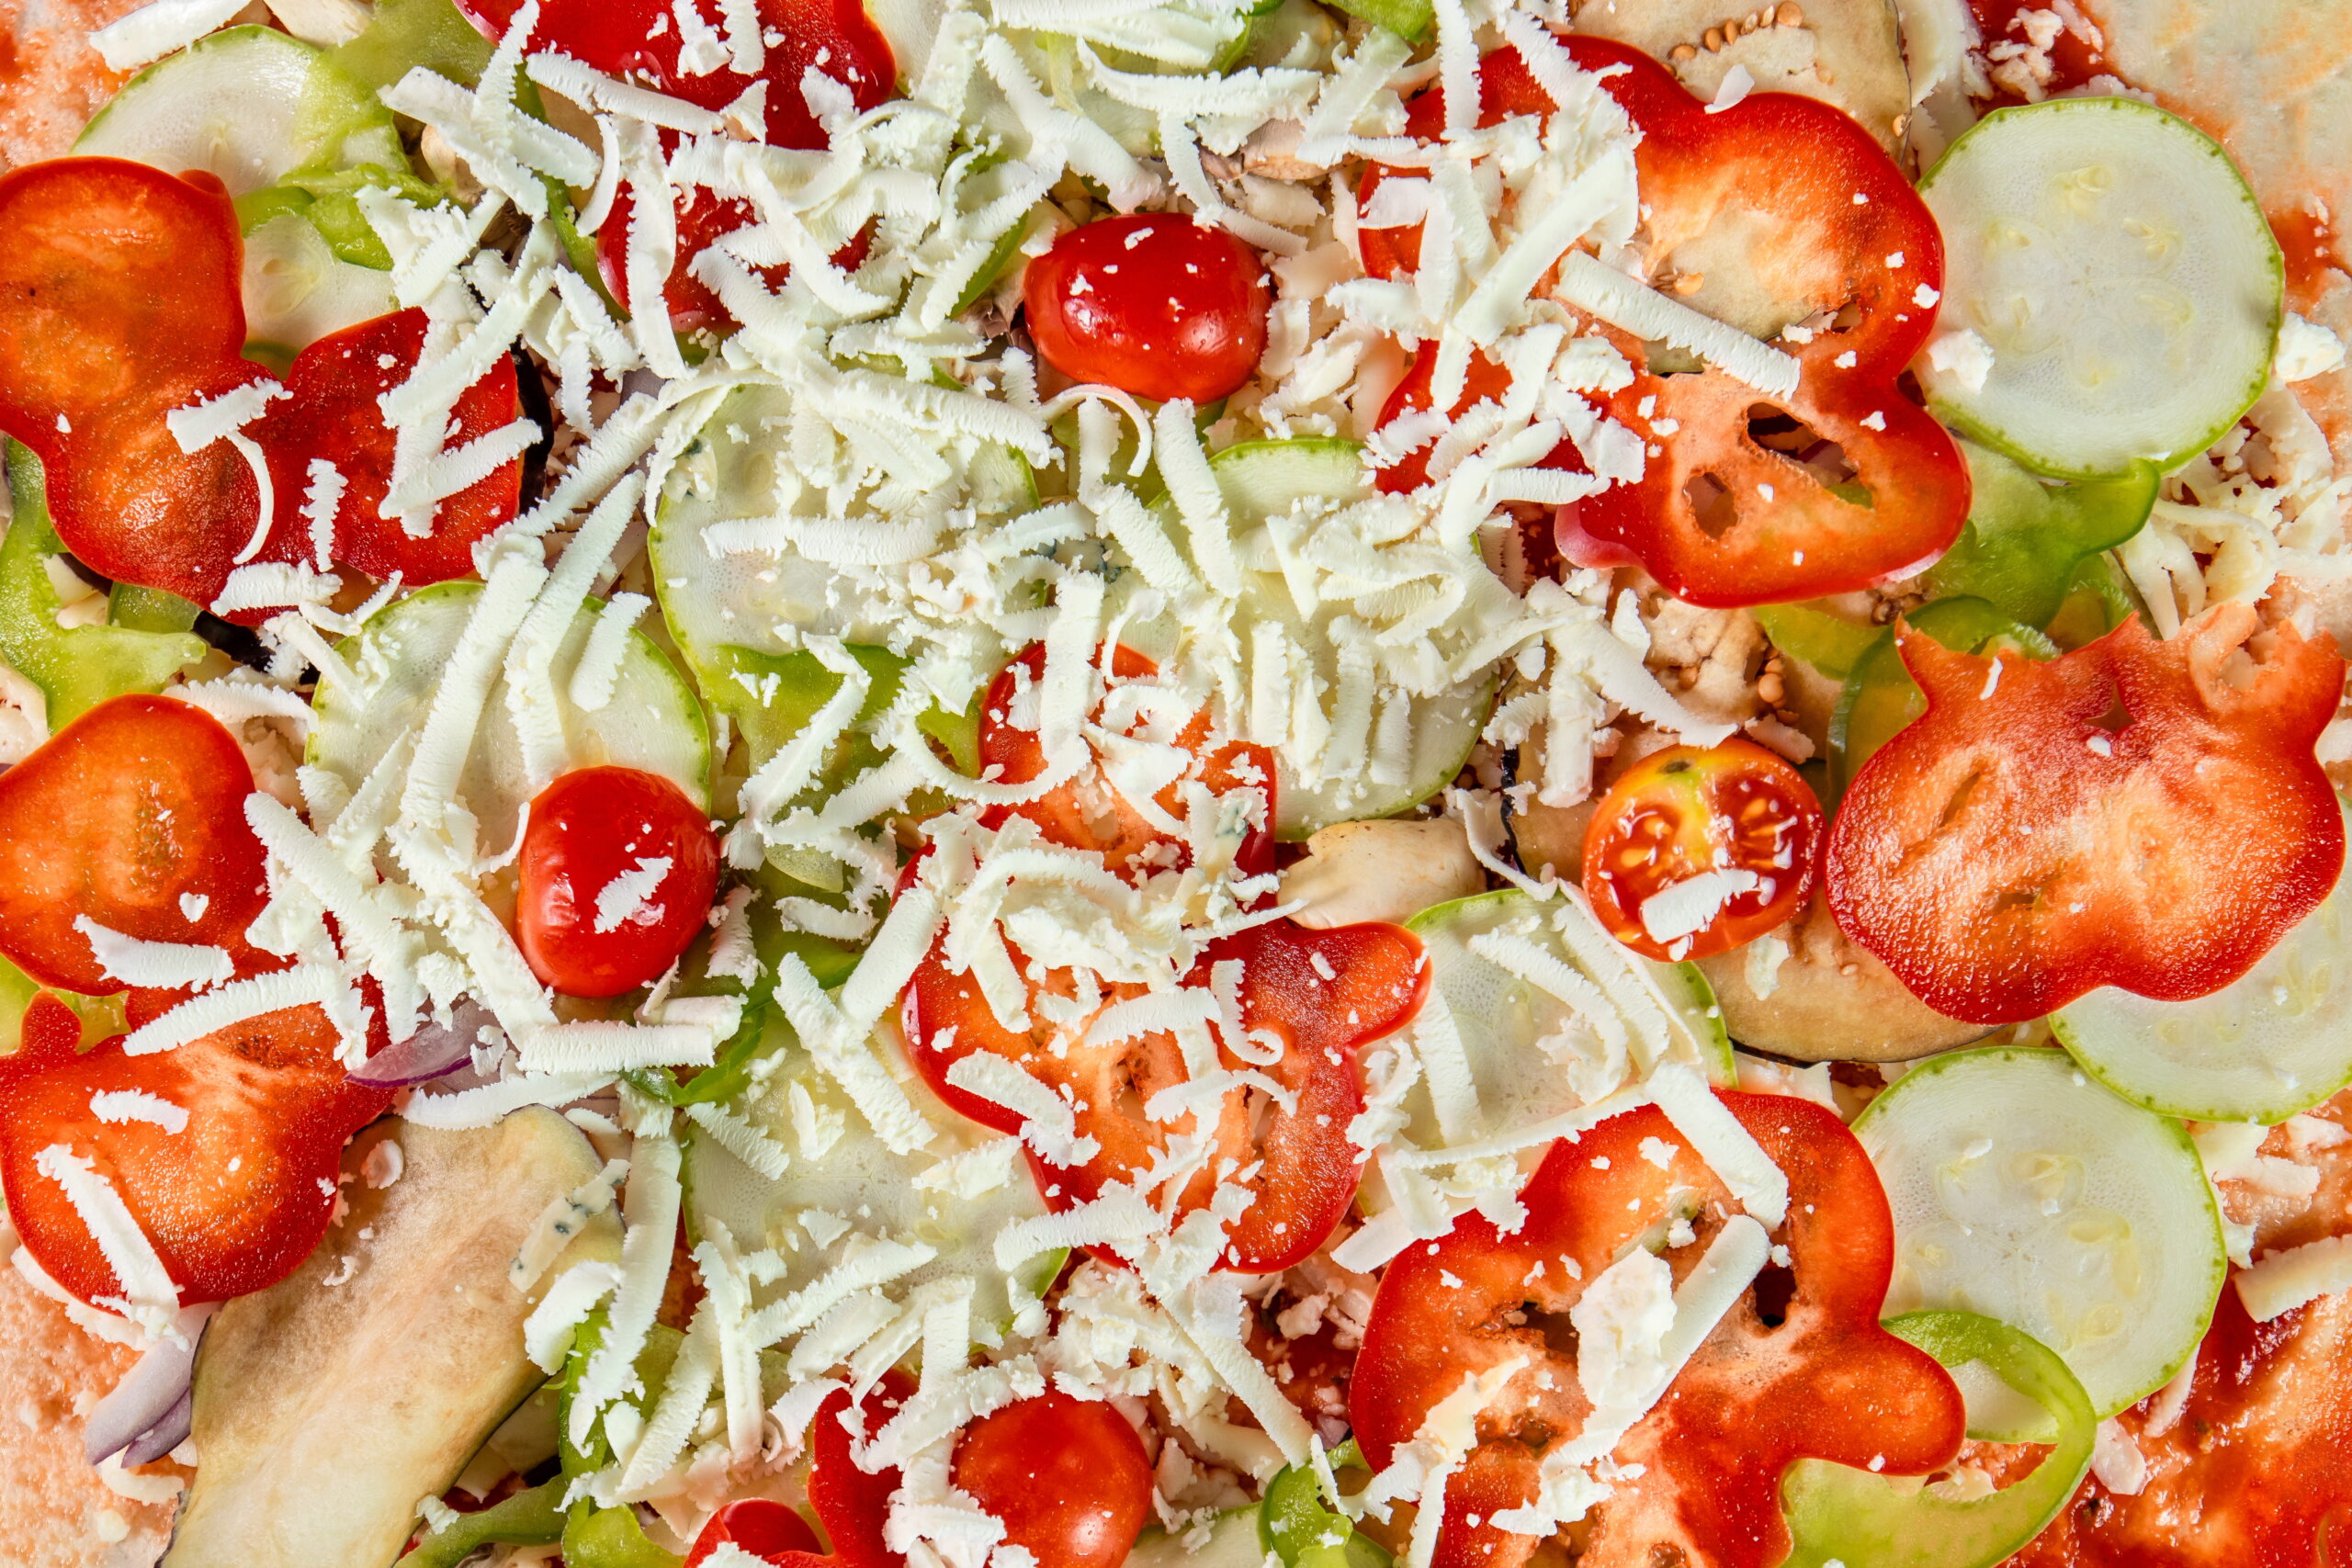 An up-close shot of a vegetarian pizza before baking, featuring mozzarella cheese, tomatoes, red and green bell peppers, and slices of cucumber, arranged beautifullyon the dough